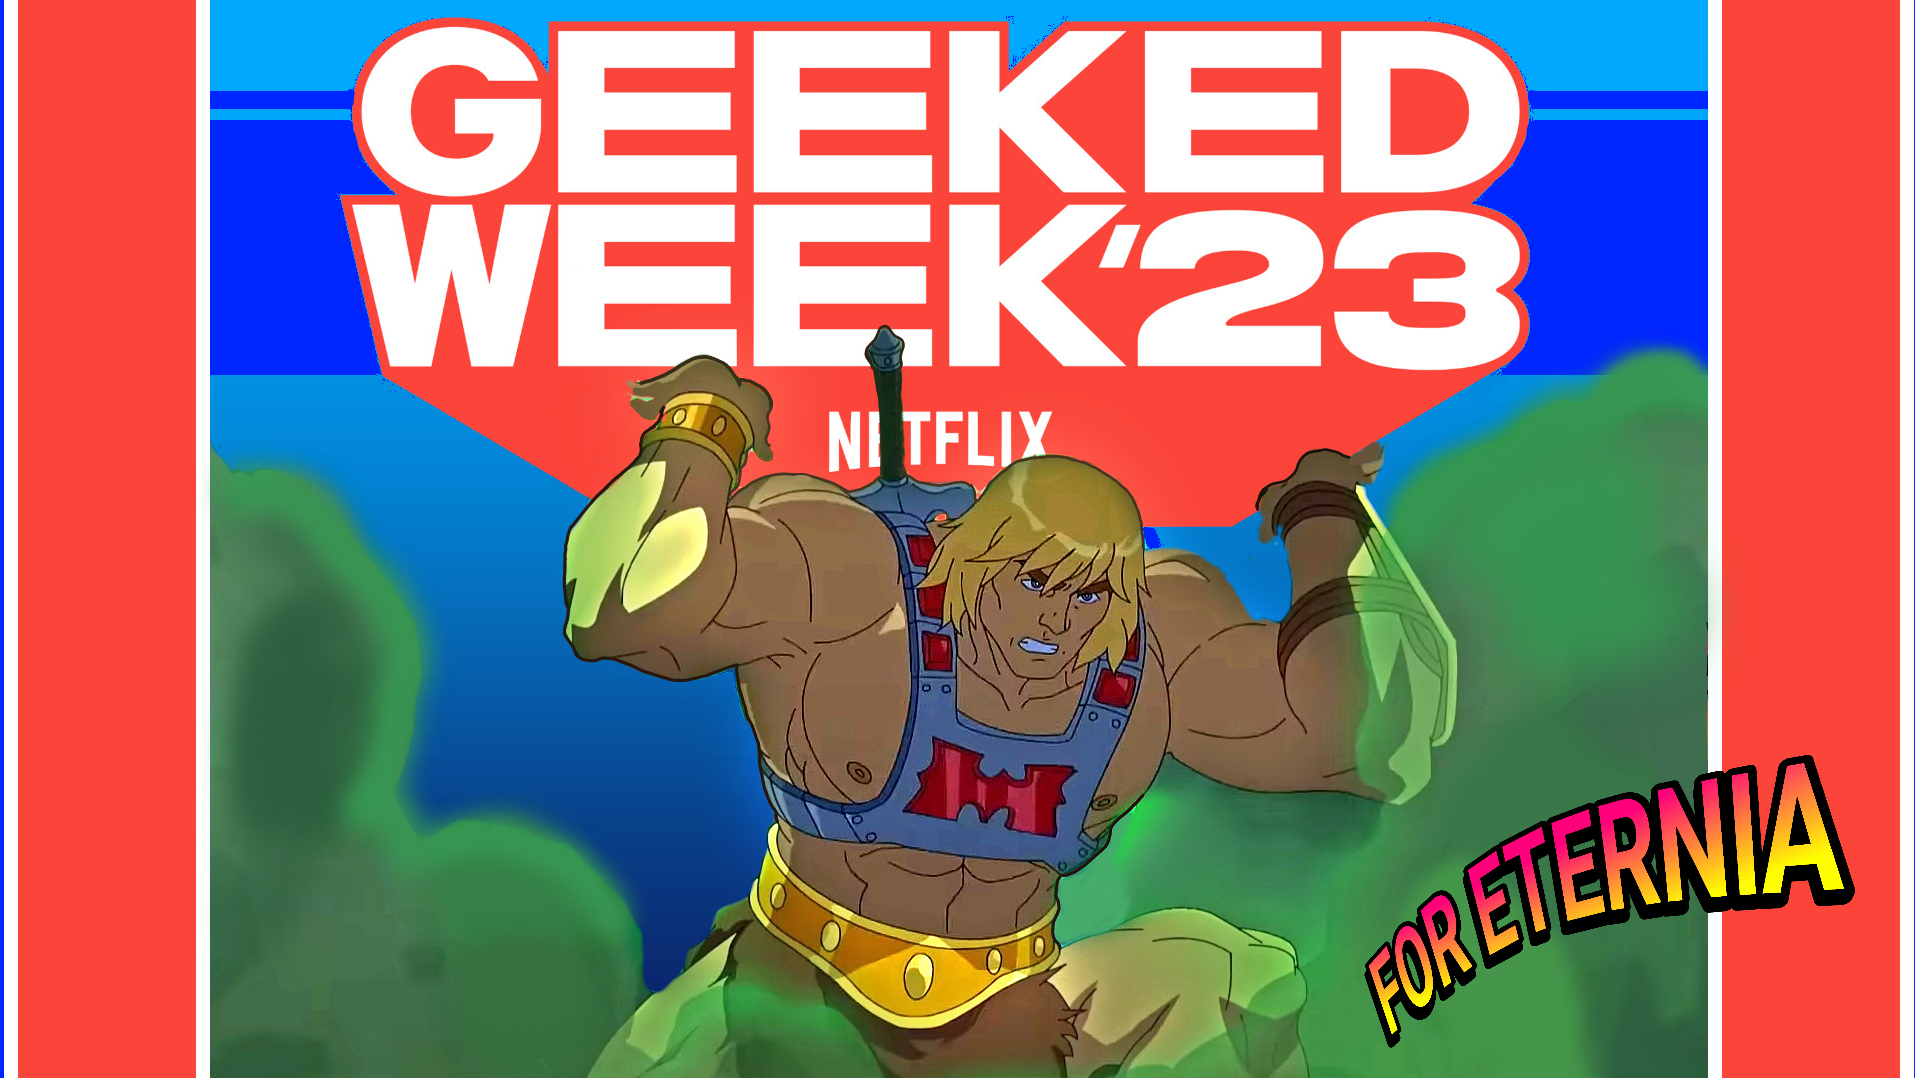 ”Masters of the Universe: Revolution” will be featured at Netflix’s Geeked Week ’23